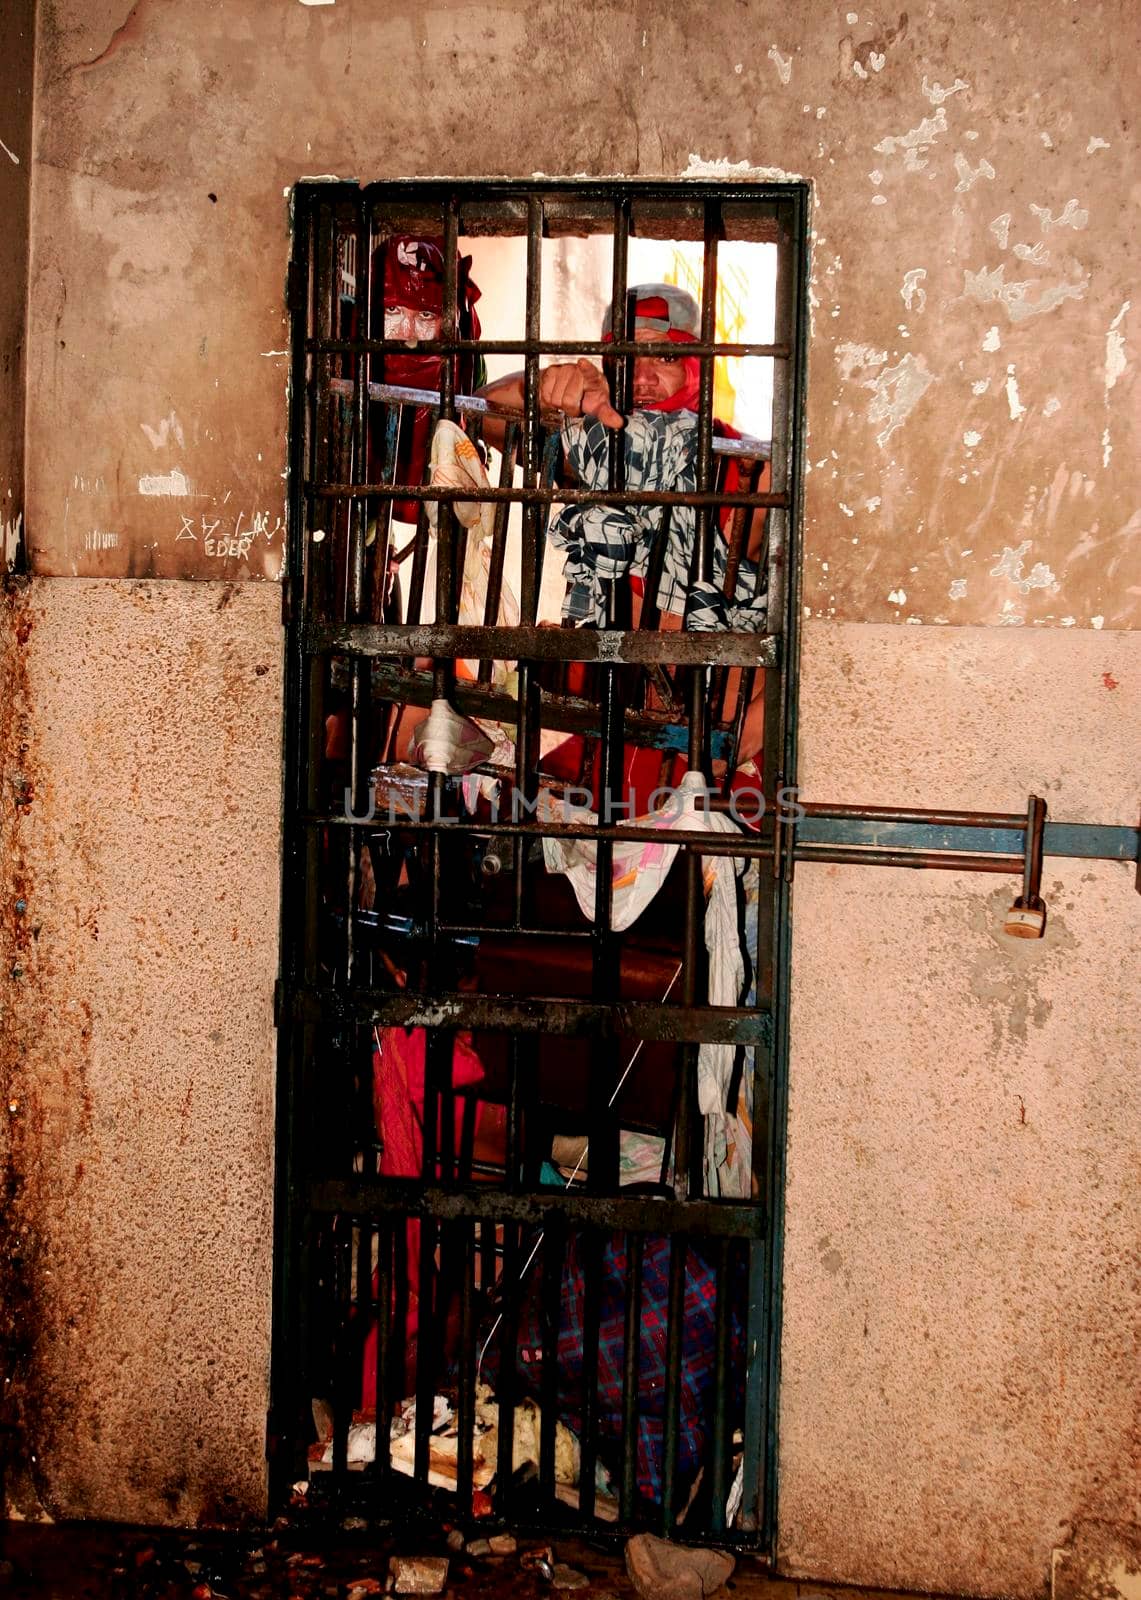 eunapolis, bahia / brazil - january 1, 2010: prisoners are seen in cells of the Police Complex in the city of Eunapolis.
